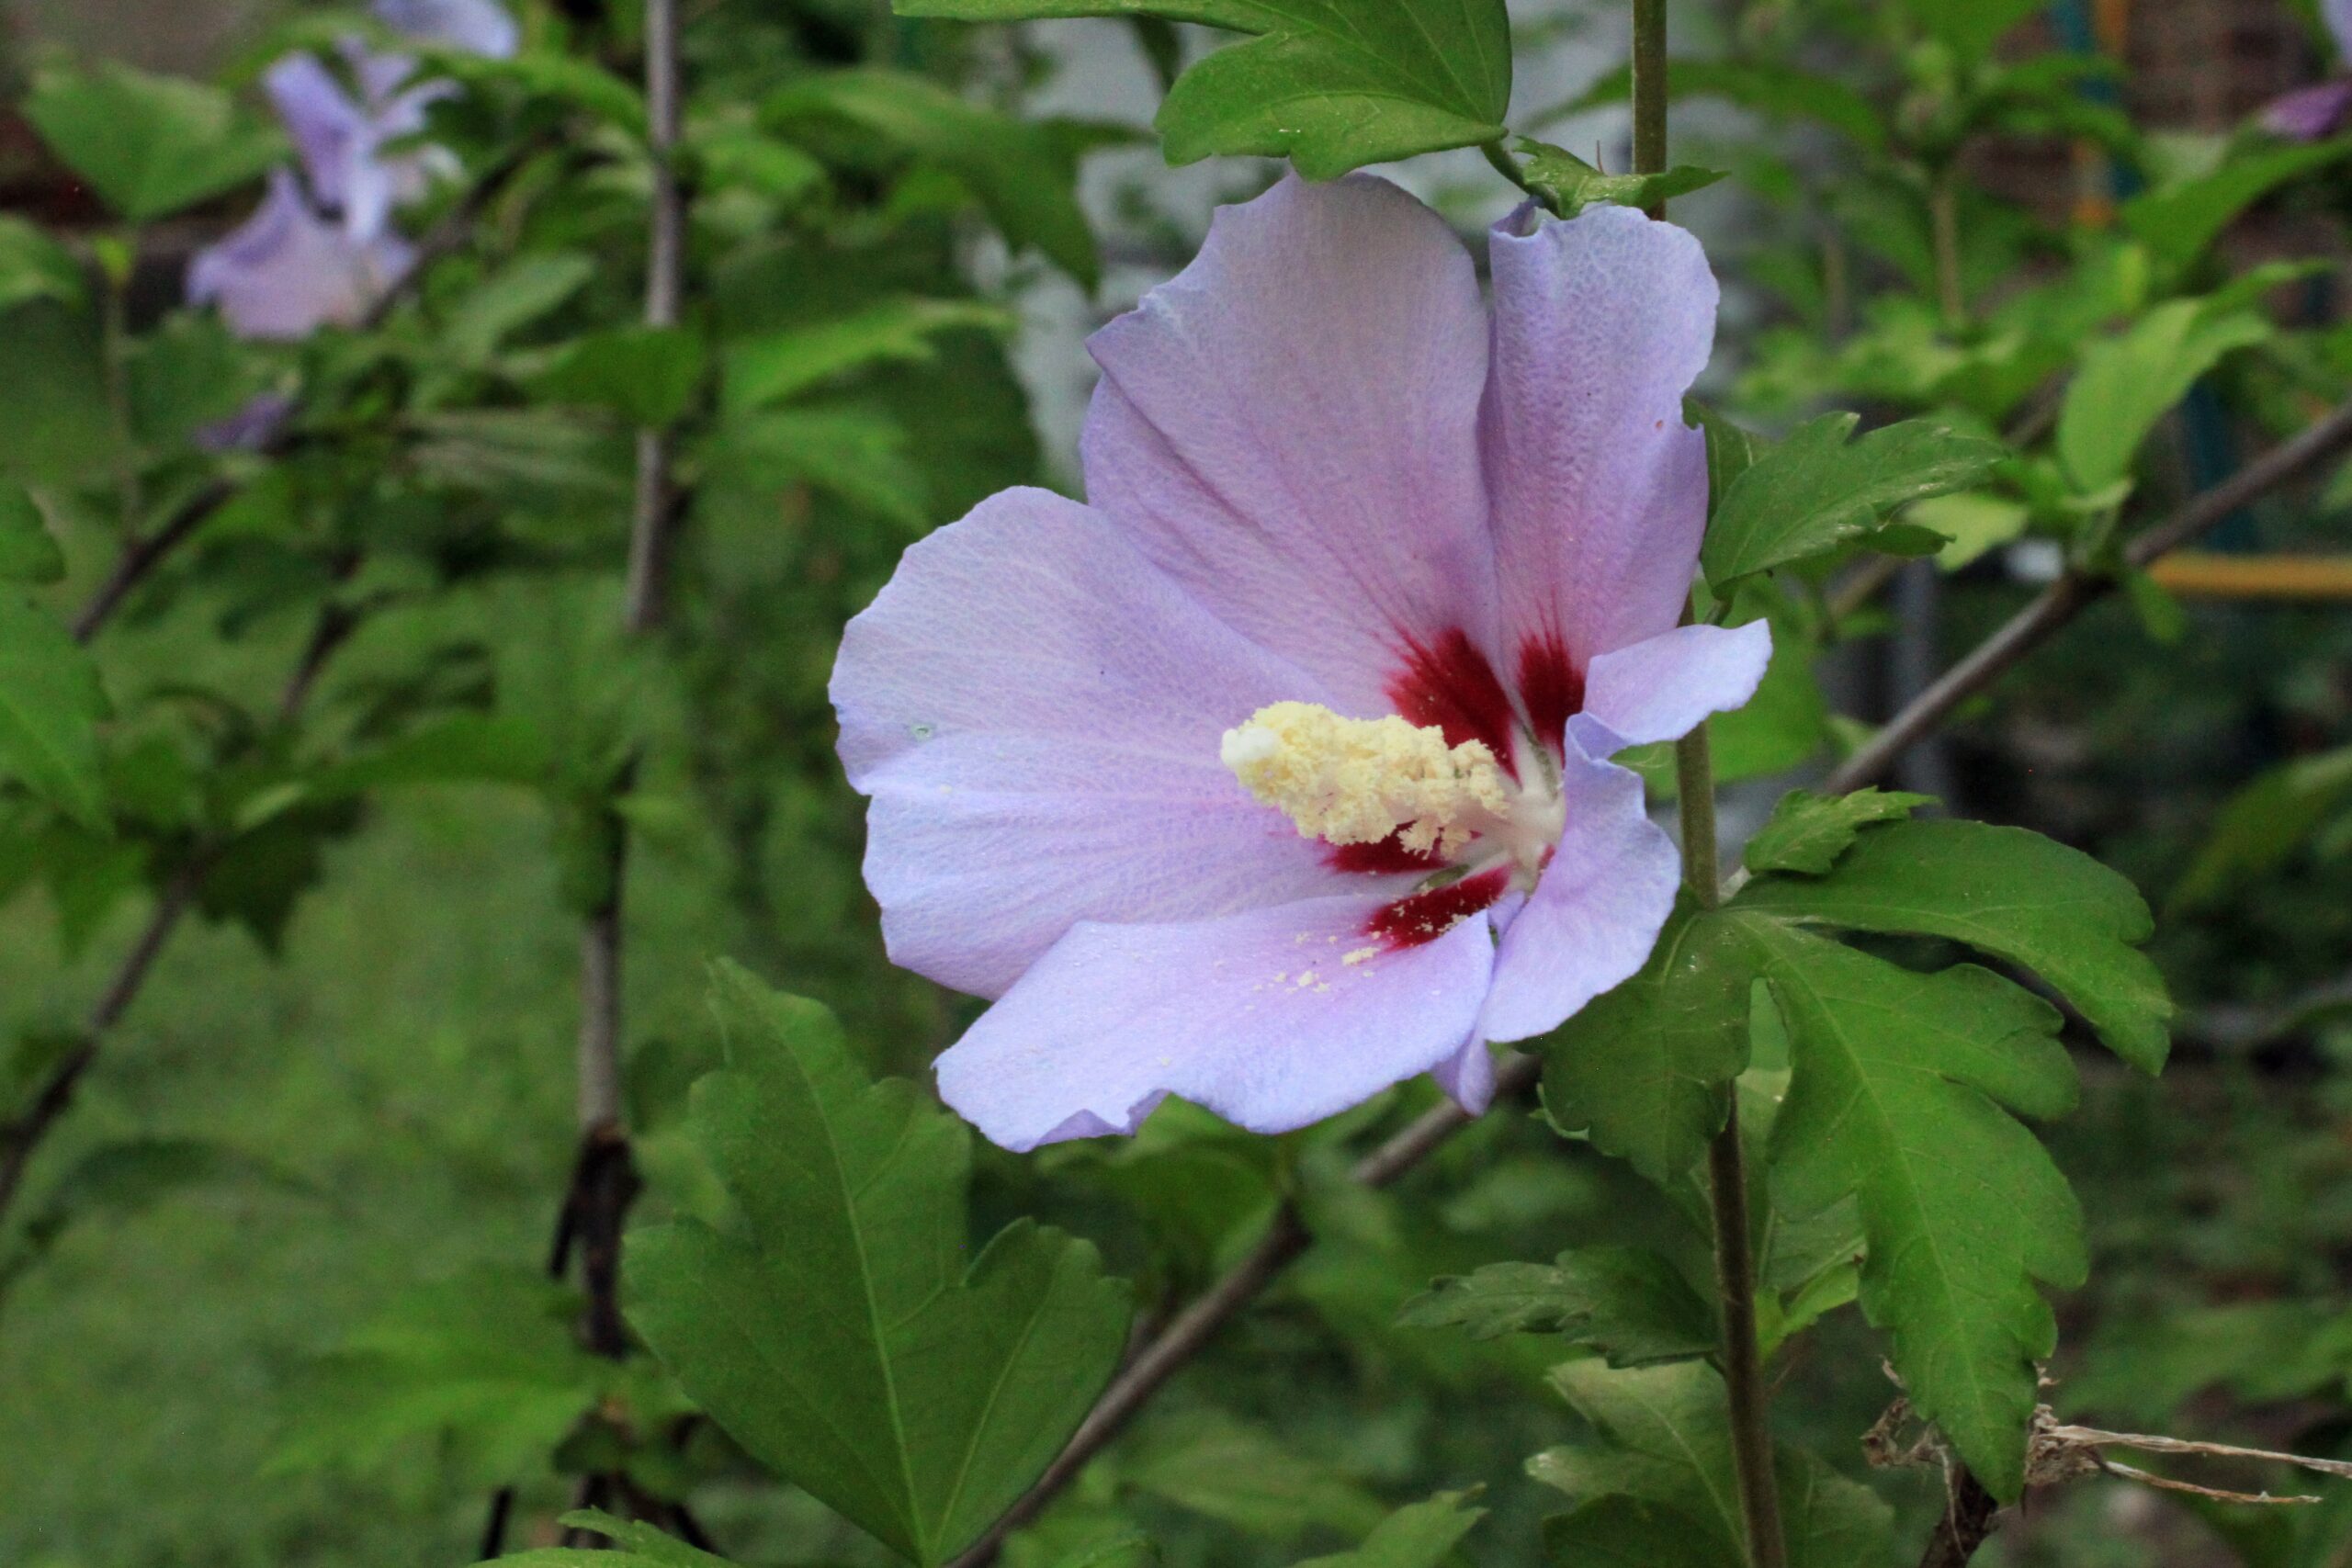 Rose of Sharon keeps some animals away